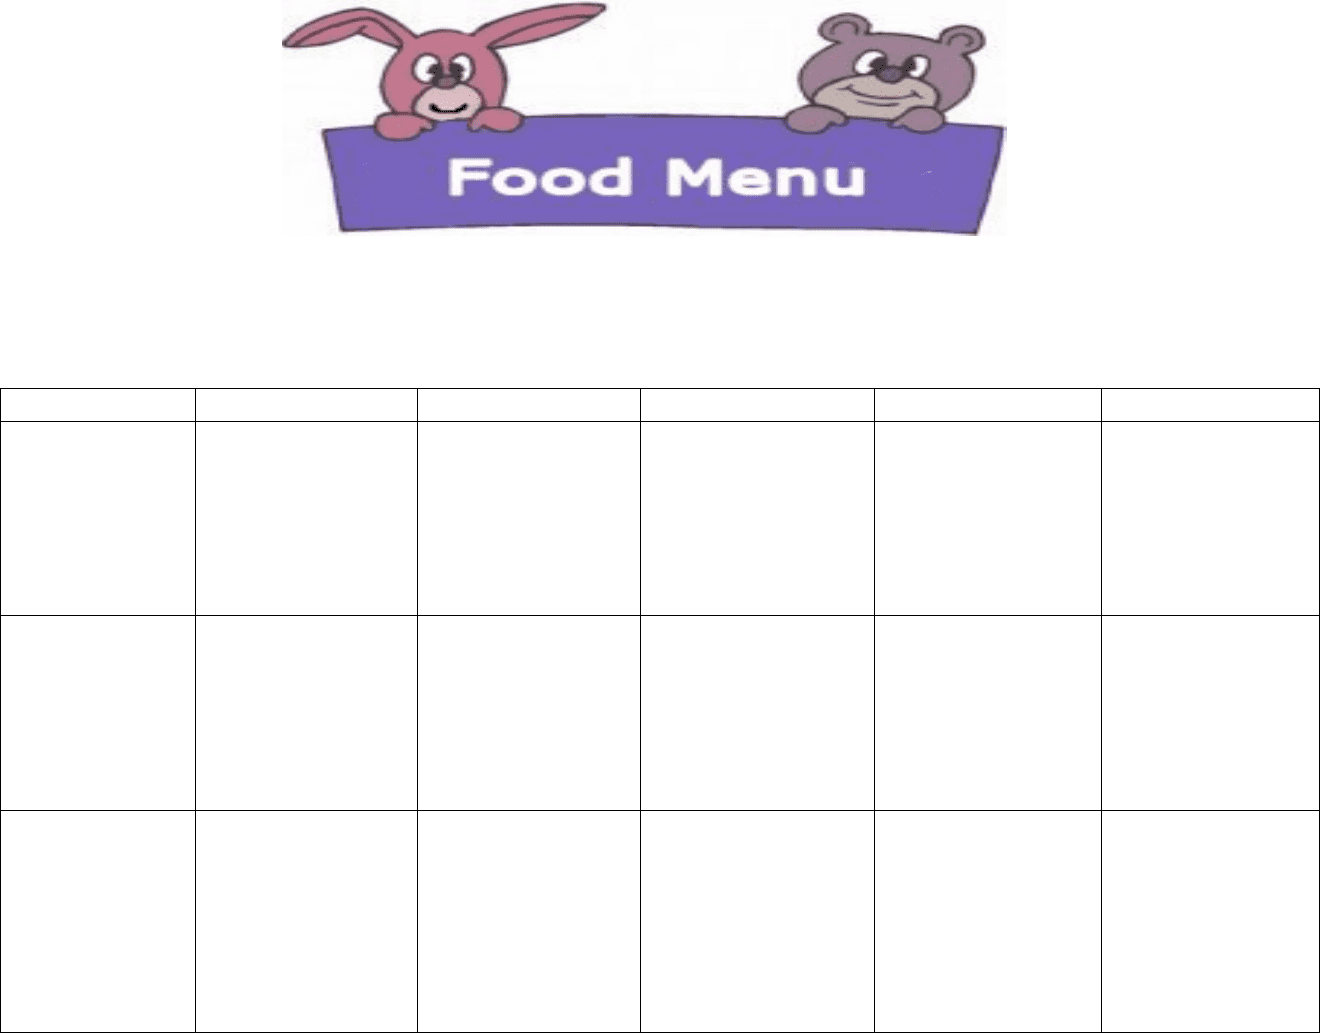 Daycare food menu template in Word and Pdf formats